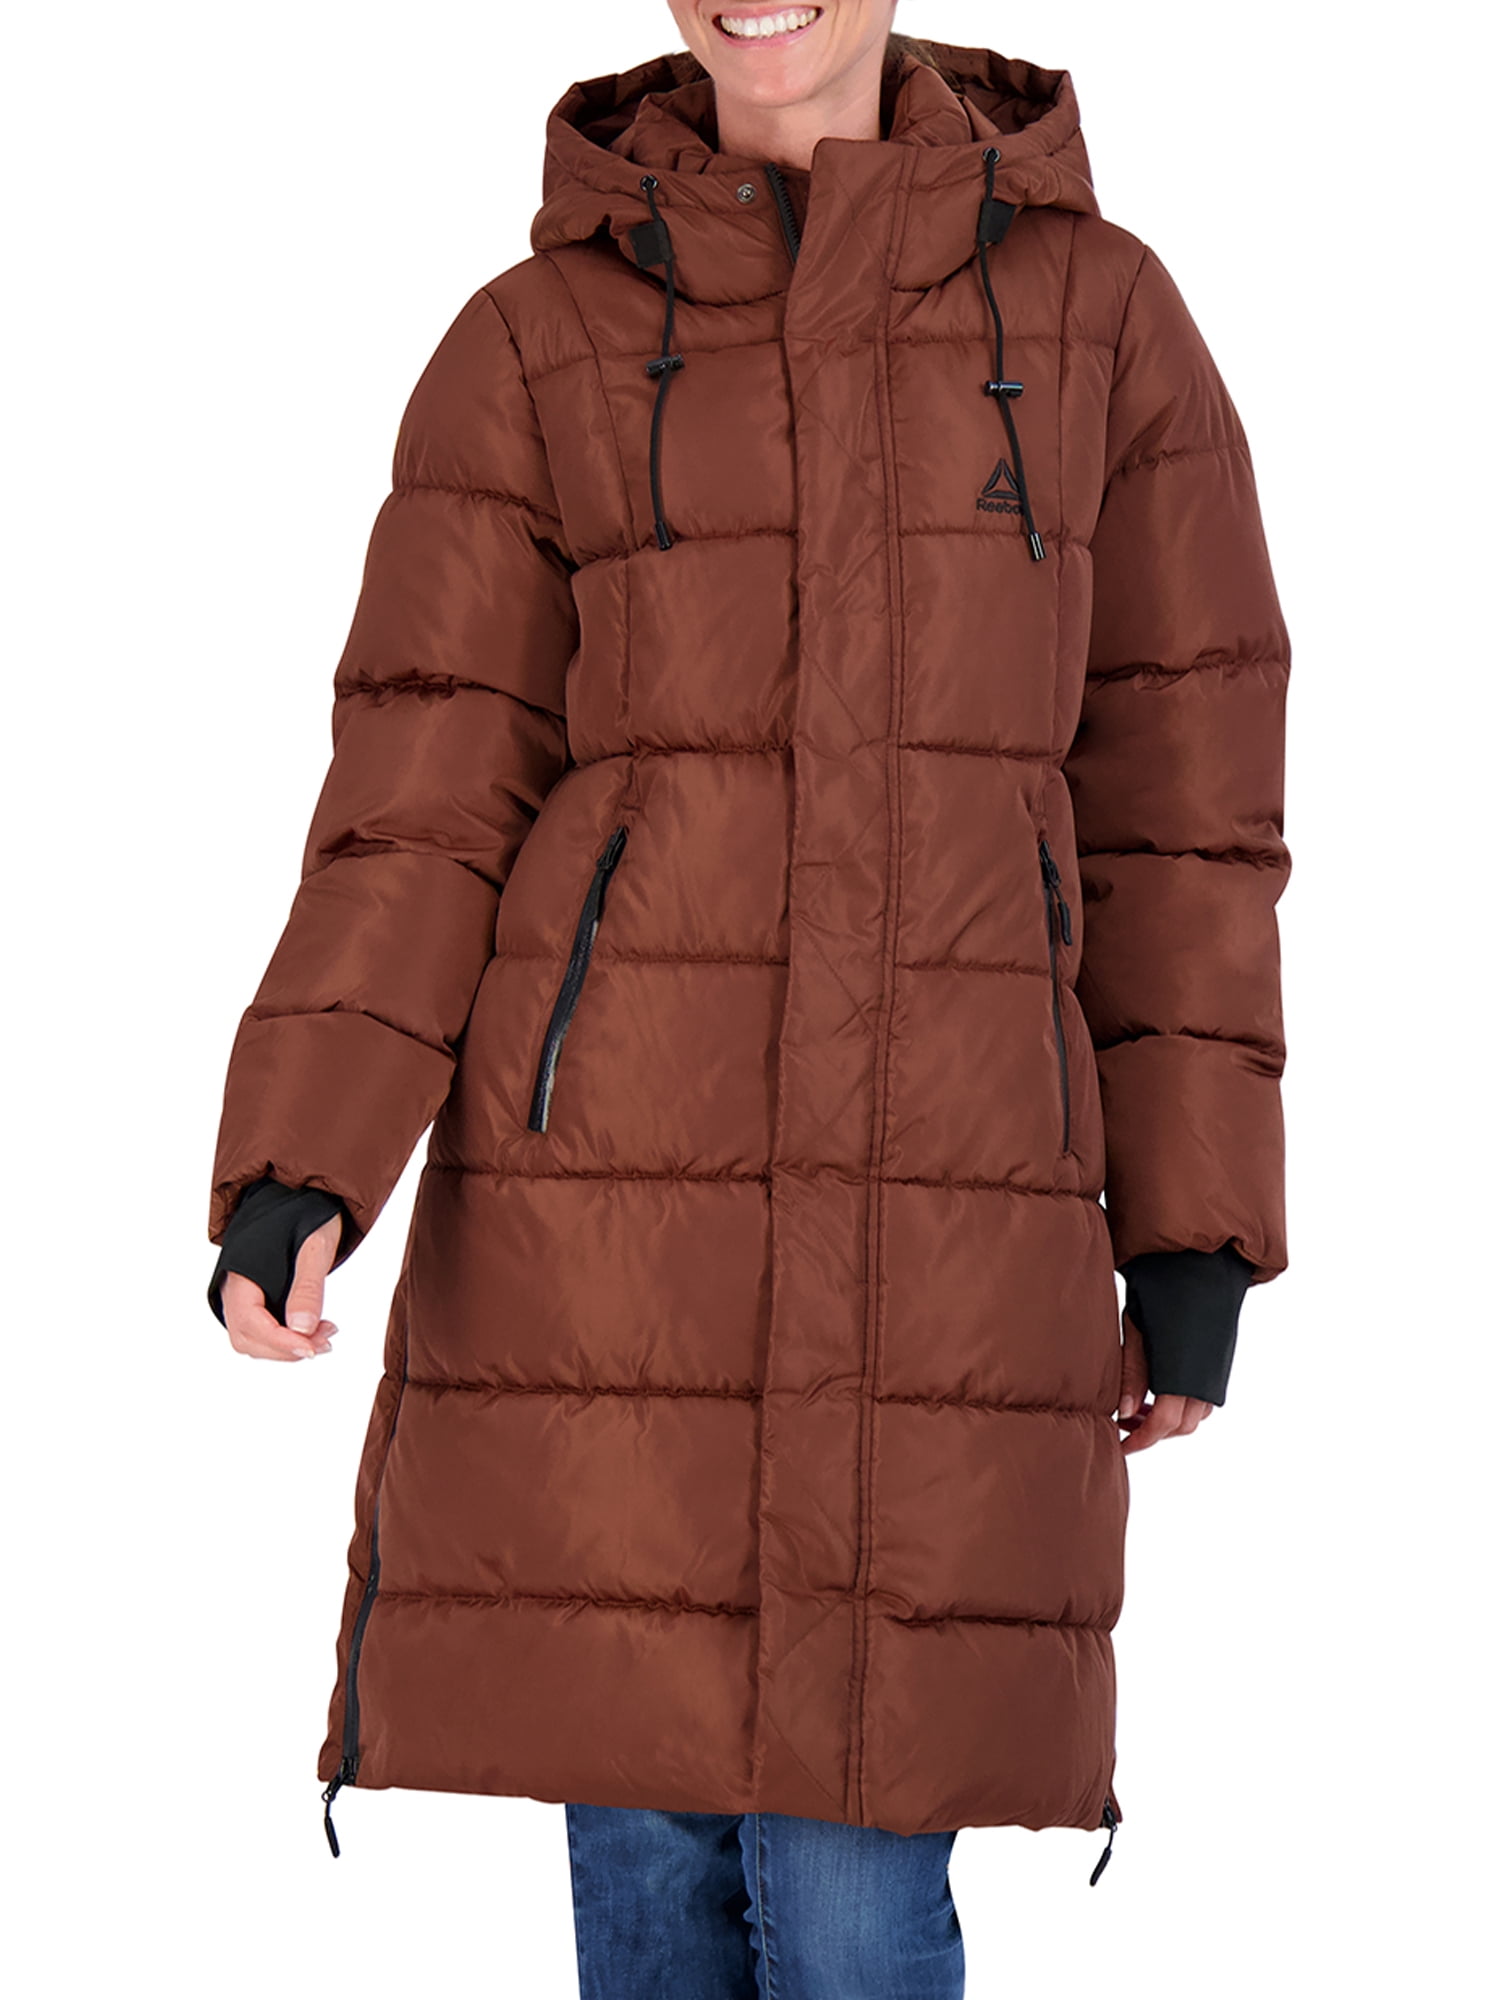 Buy Reebok Womens Maxi Puffer Coat with Hood Online at Lowest Price in ...